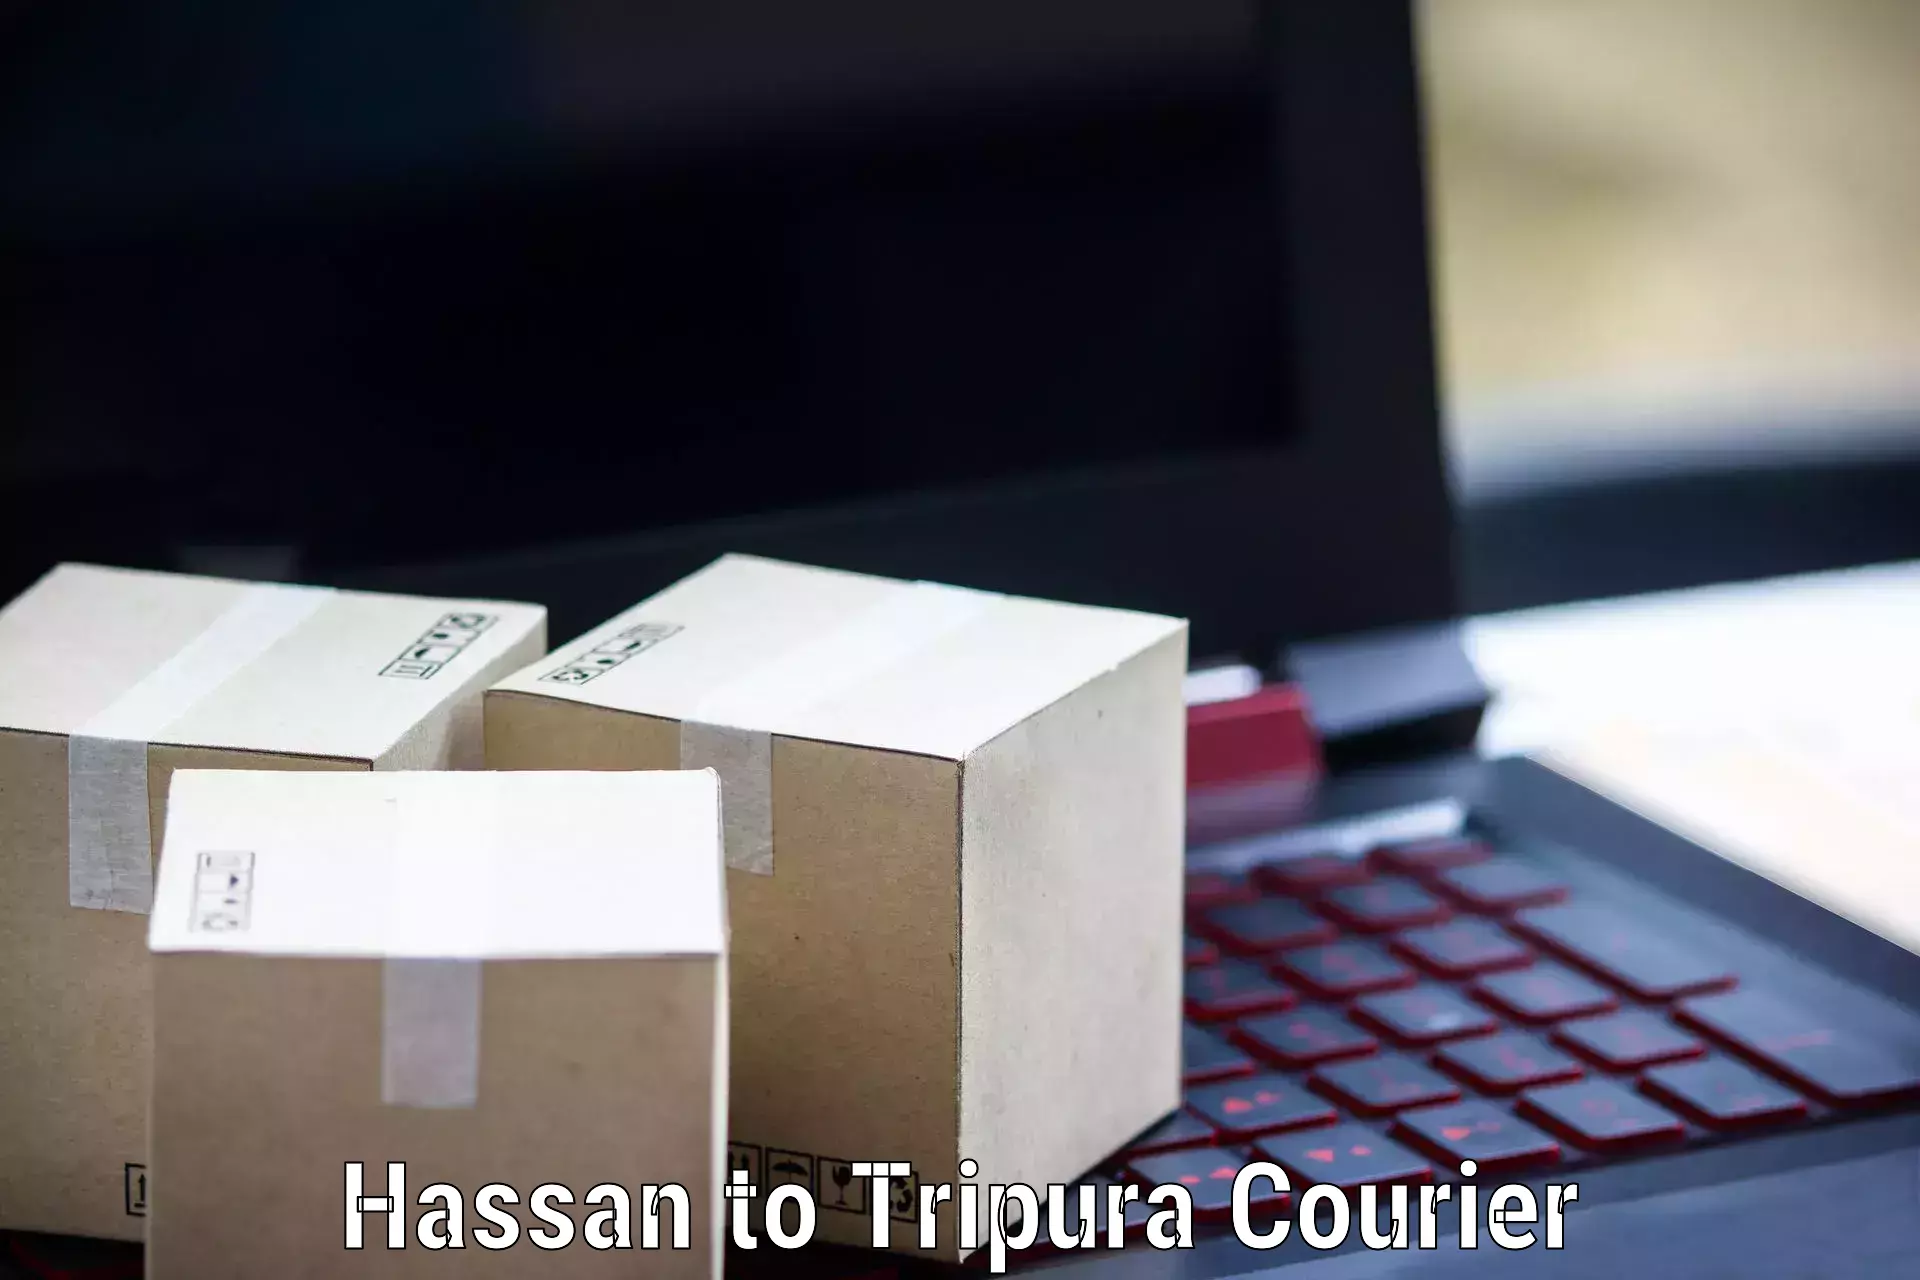 International courier networks Hassan to Udaipur Tripura